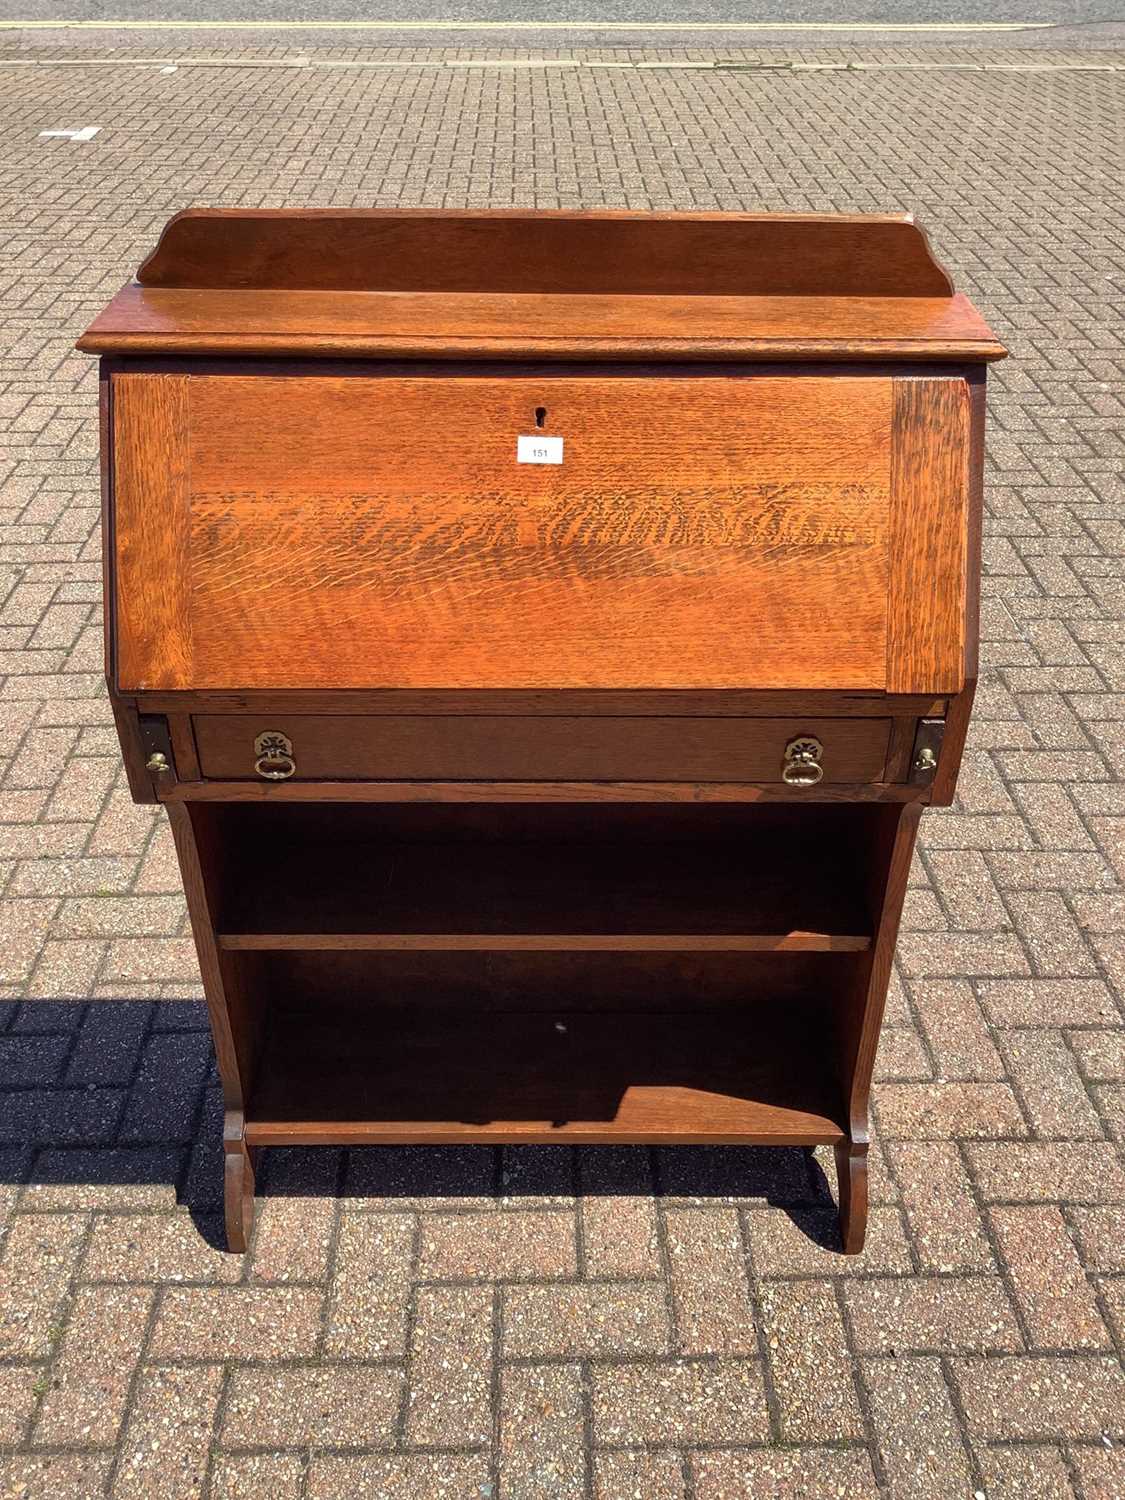 Lot 151 - Oak escritoire with fall front, drawer and open shelves below, 78cm wide x 27cm deep x 114cm high